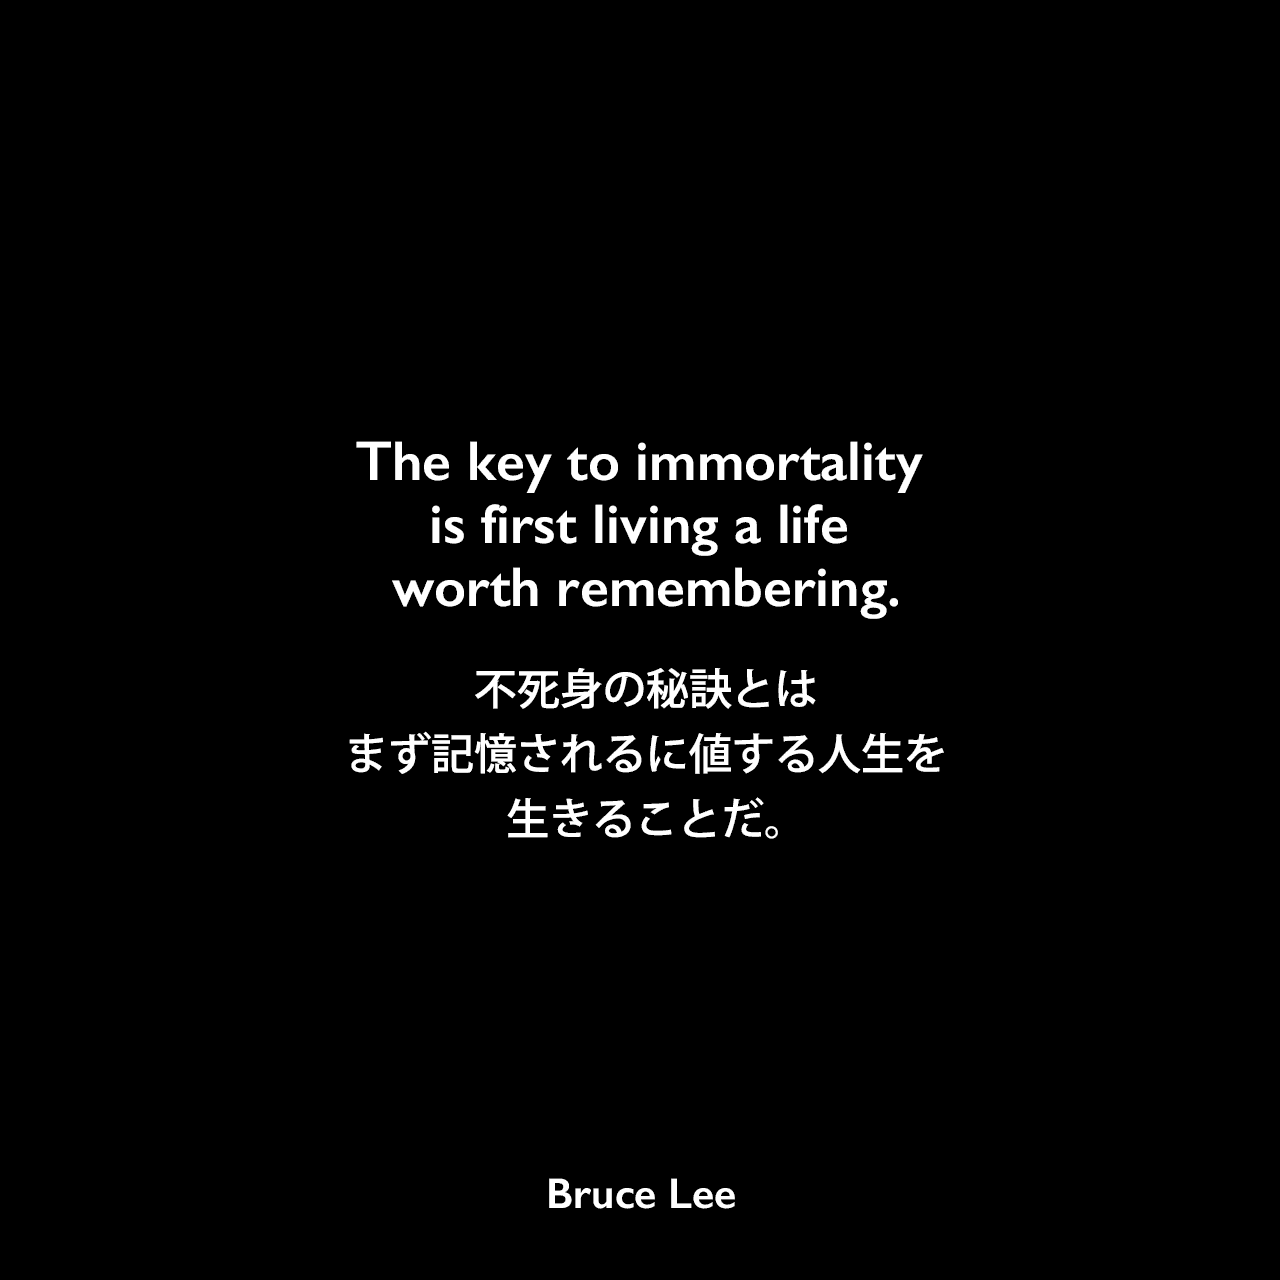 The key to immortality is first living a life worth remembering.不死身の秘訣とは、まず記憶されるに値する人生を生きることだ。Bruce Lee